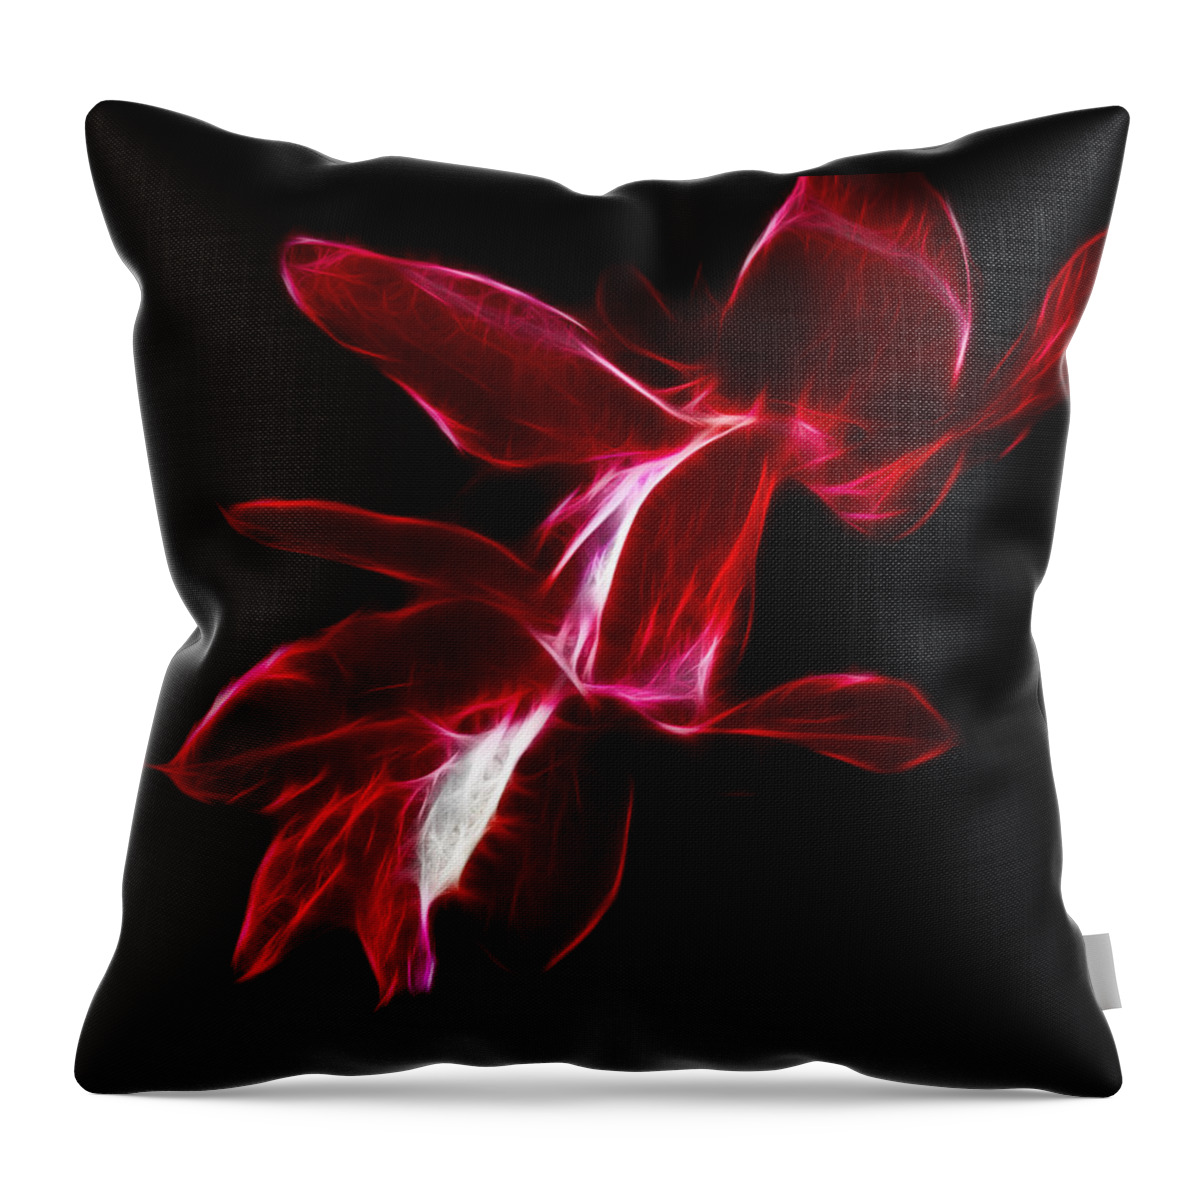 Christmas Cactus Flower Throw Pillow featuring the photograph Christmas Cactus Flower by Shane Bechler